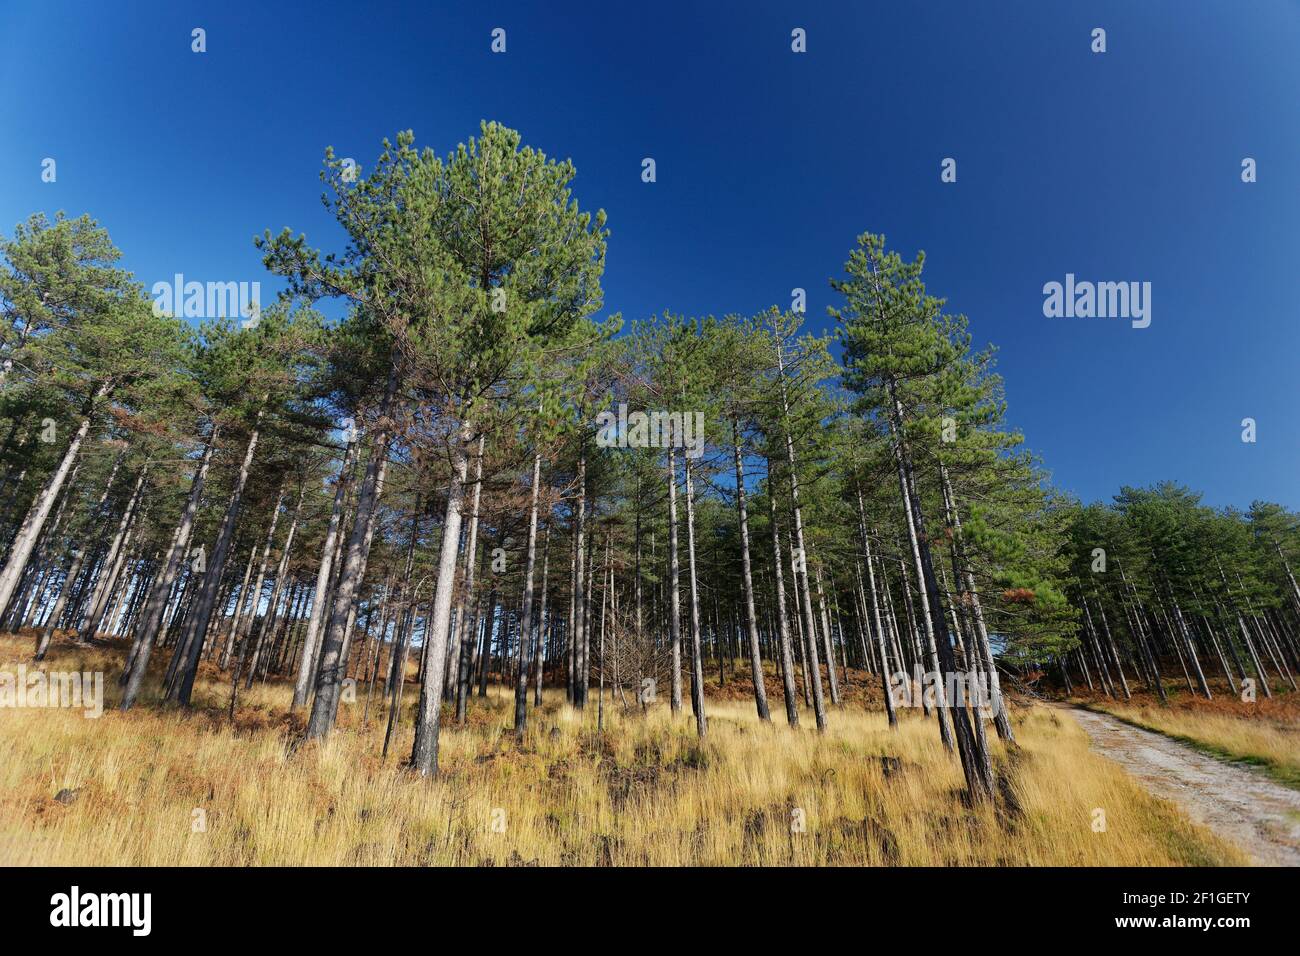 Pine trees and golden grass and rich blue sky in Wareham Forest Dorset Stock Photo